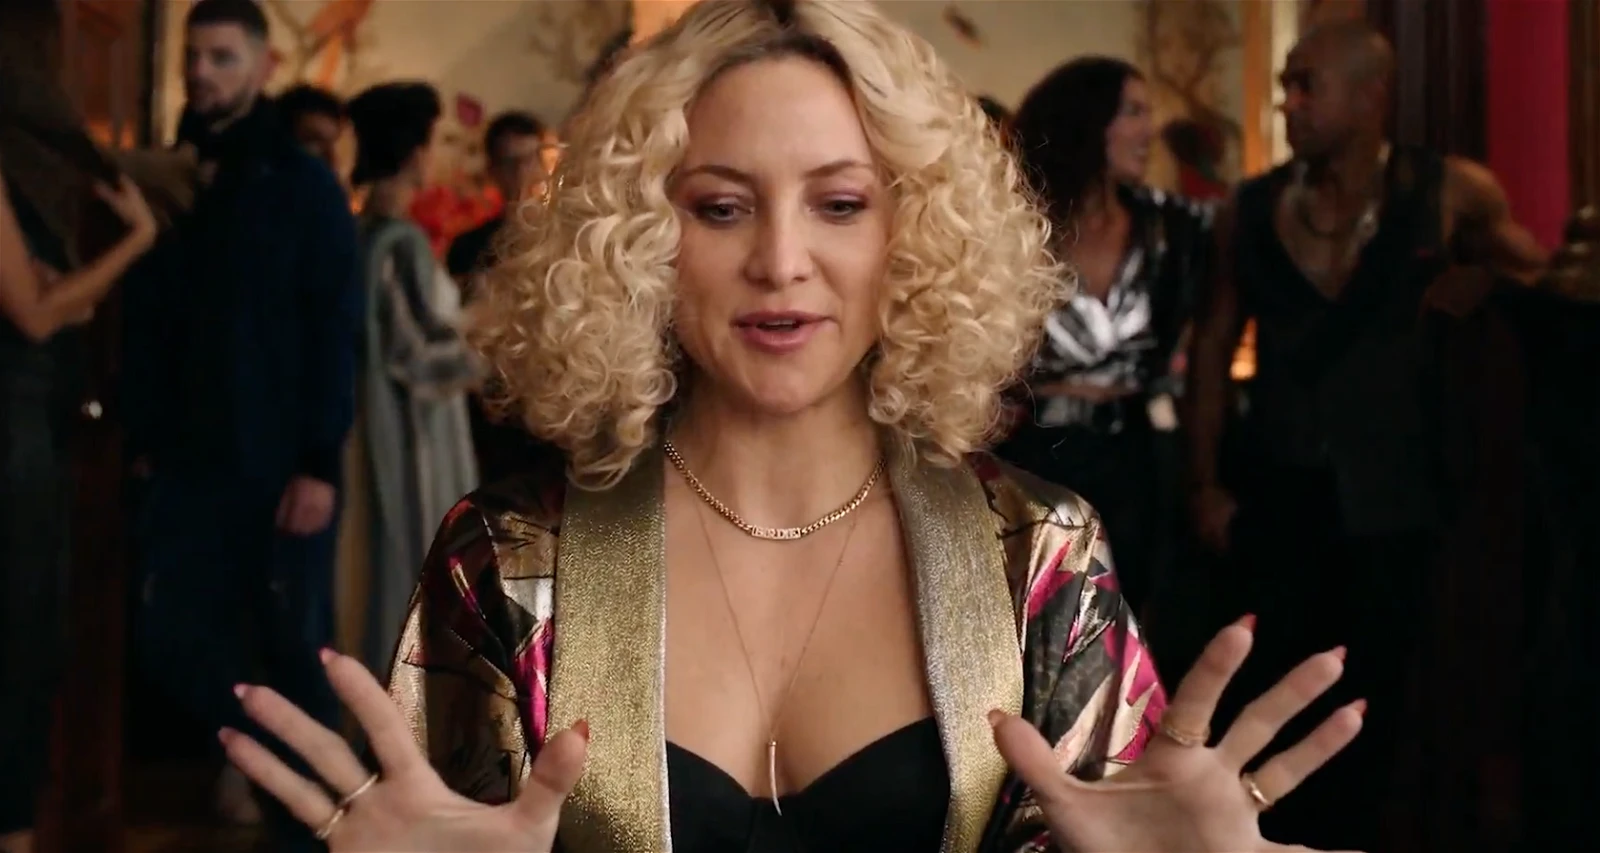 Kate Hudson's look in her recent film Glass Onion